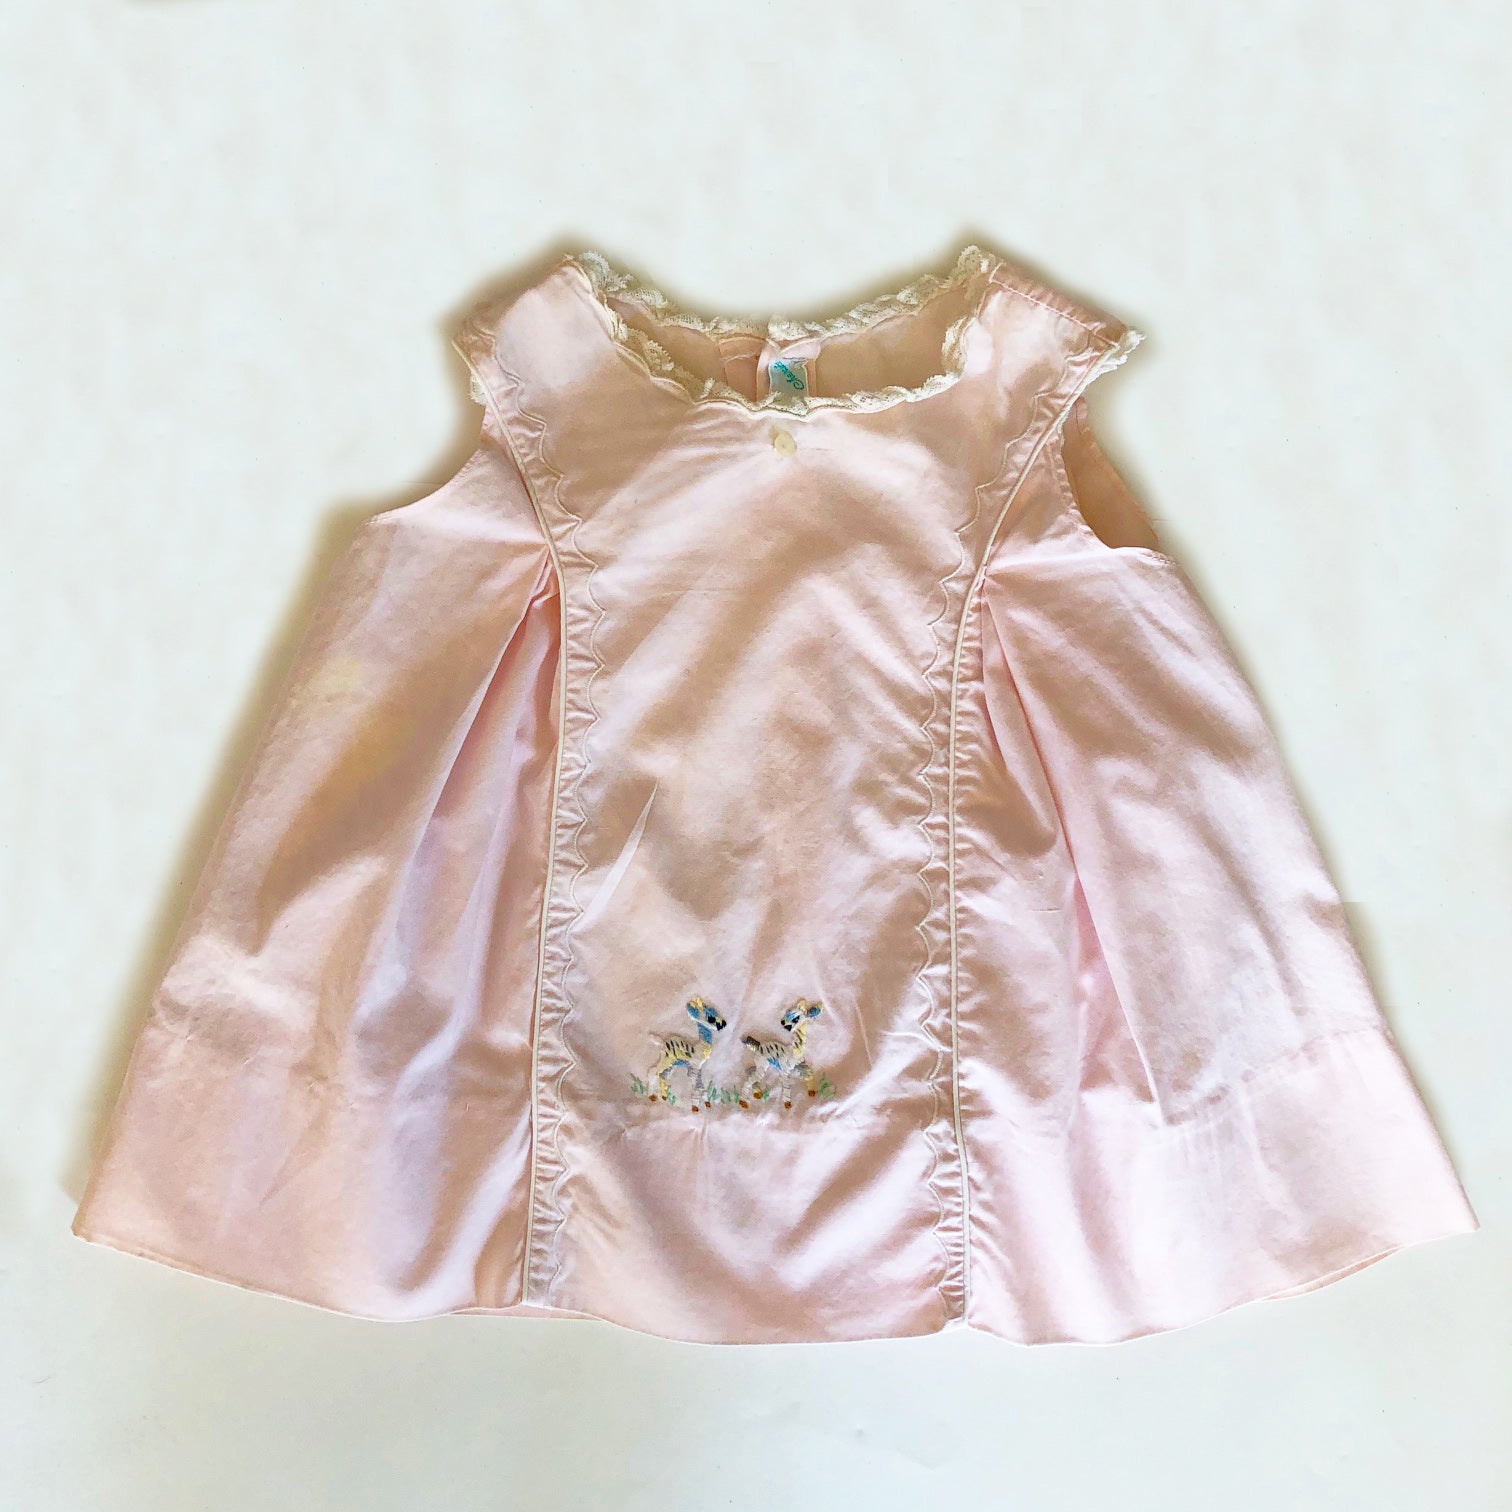 Vintage Baby Dress with Embroidered Deer size 6-12 months